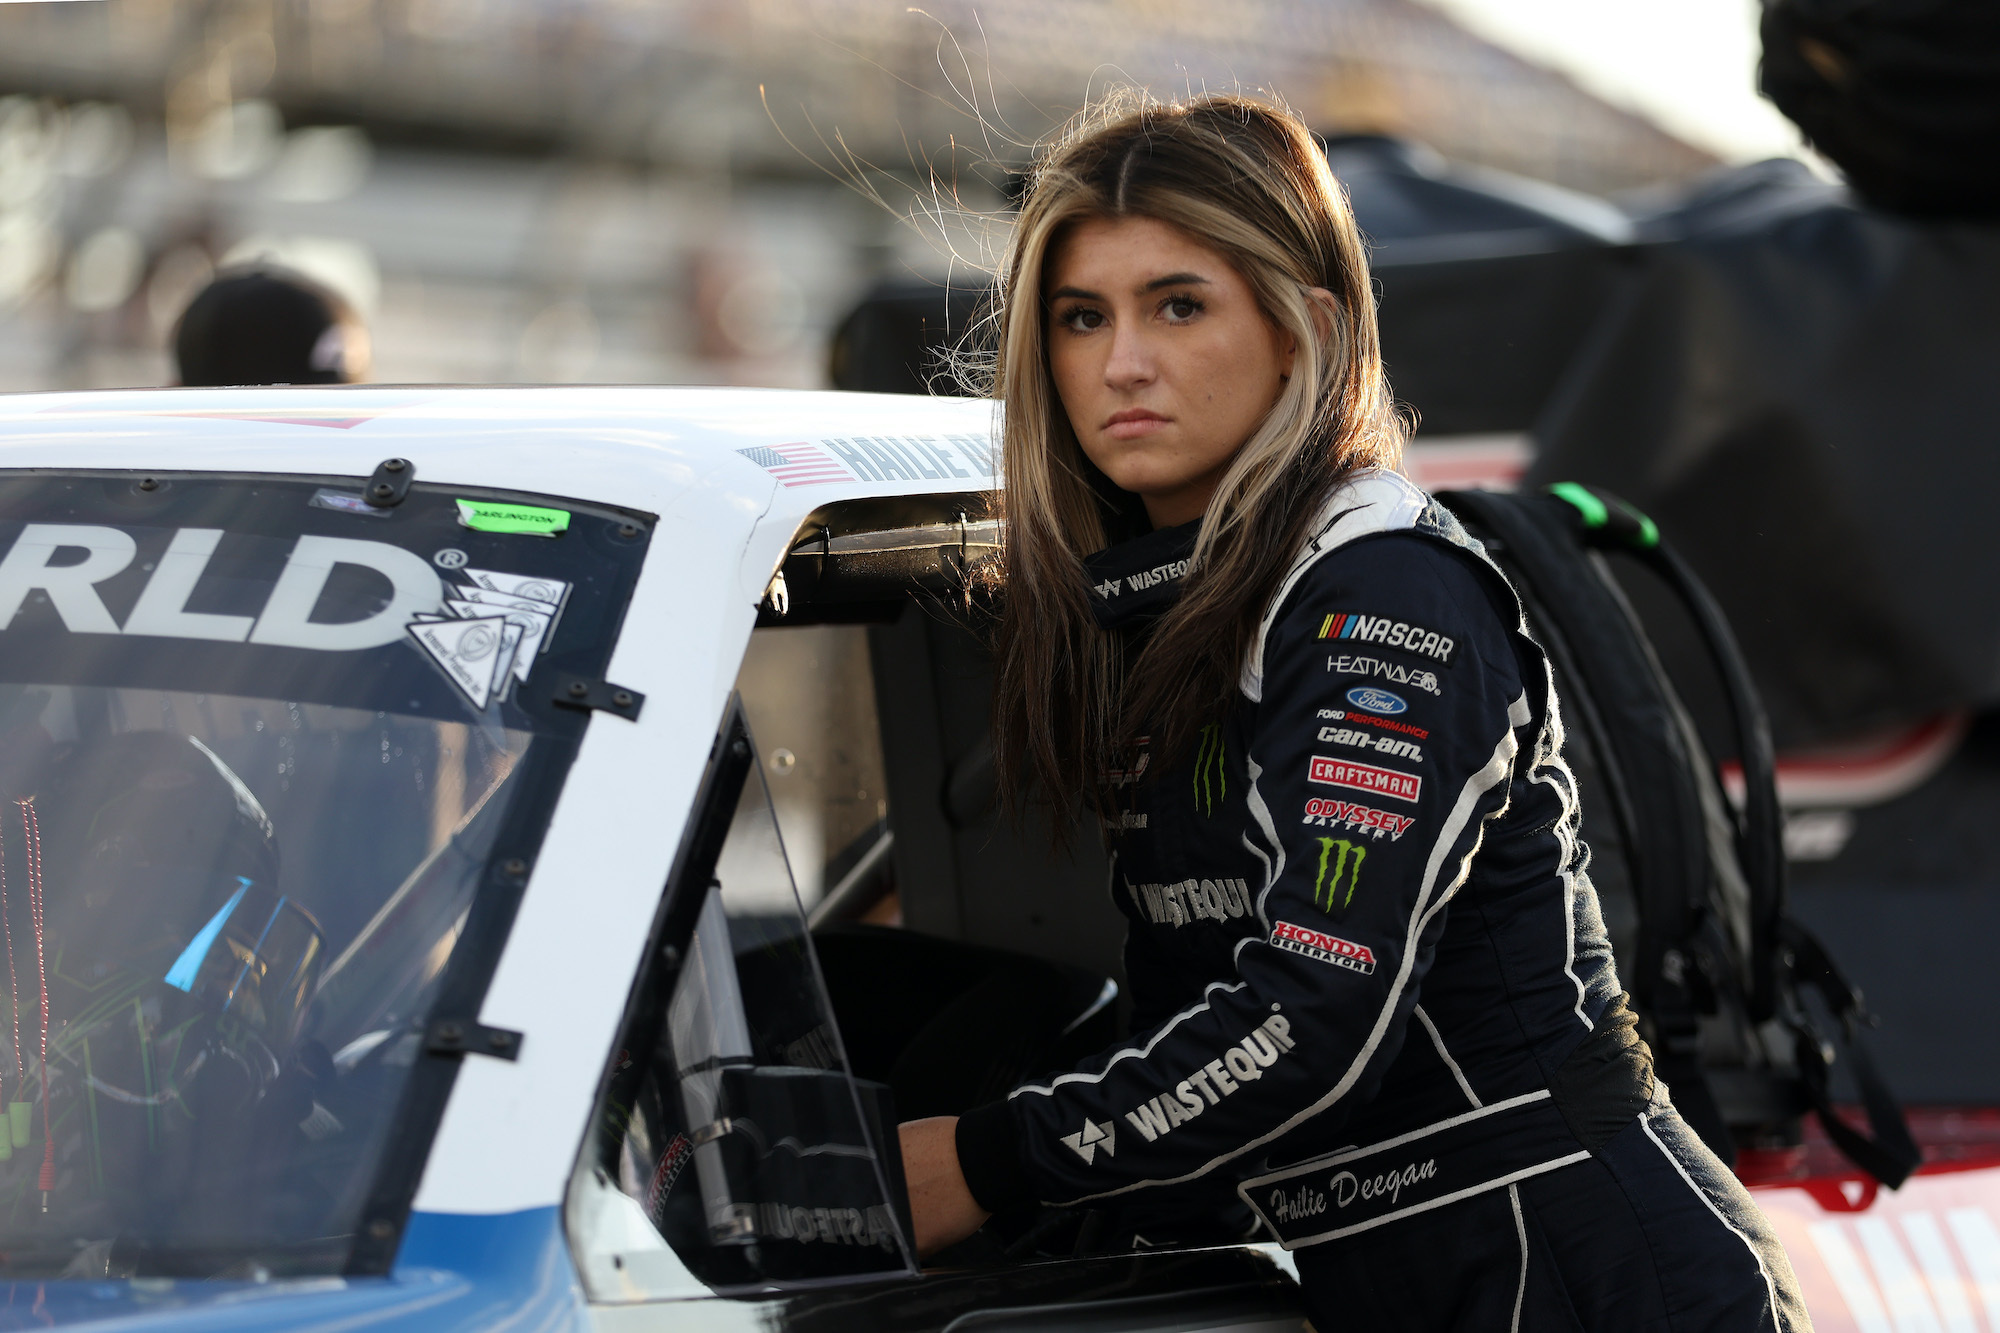 Hailie Deegan Candidly Admits Other Drivers Take Advantage of Her and Explains Why She Doesn’t Retaliate